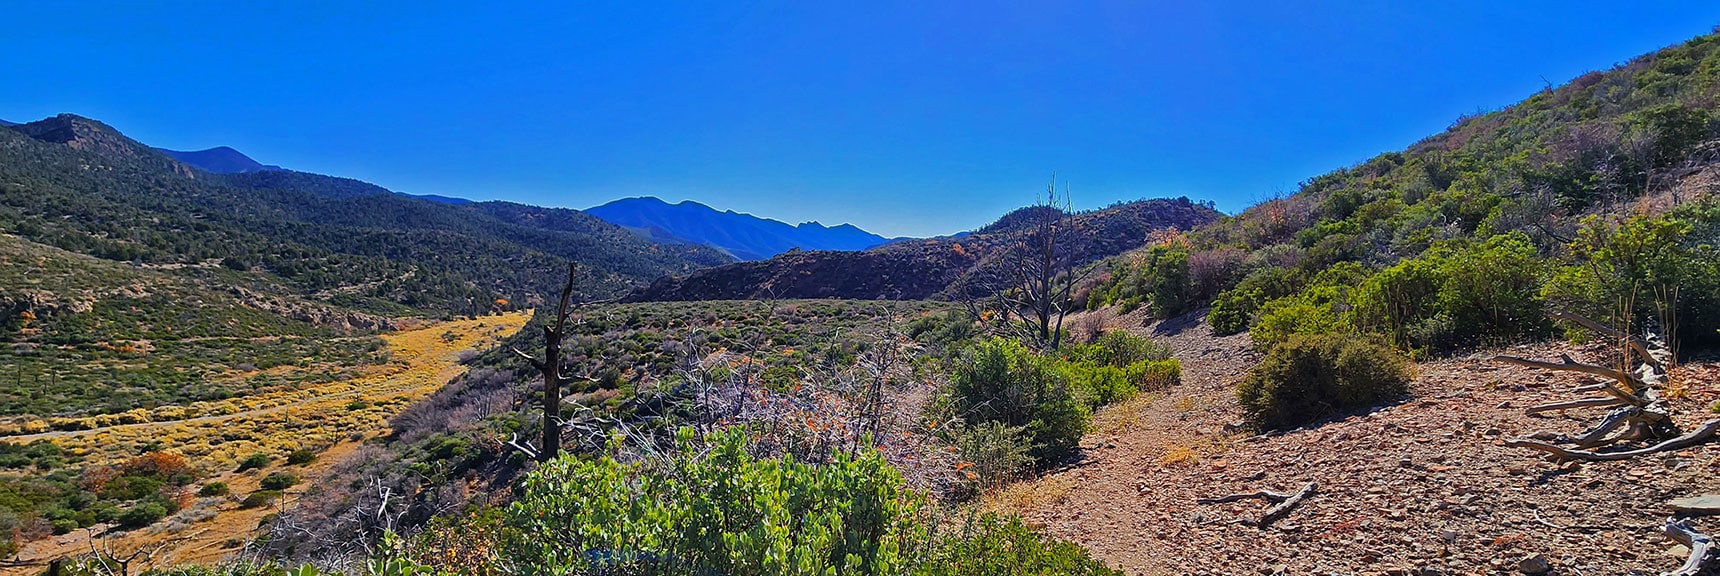 View Back Along Trail Just Traversed. | Schaefer Springs Loop Trail | Lovell Canyon, Nevada